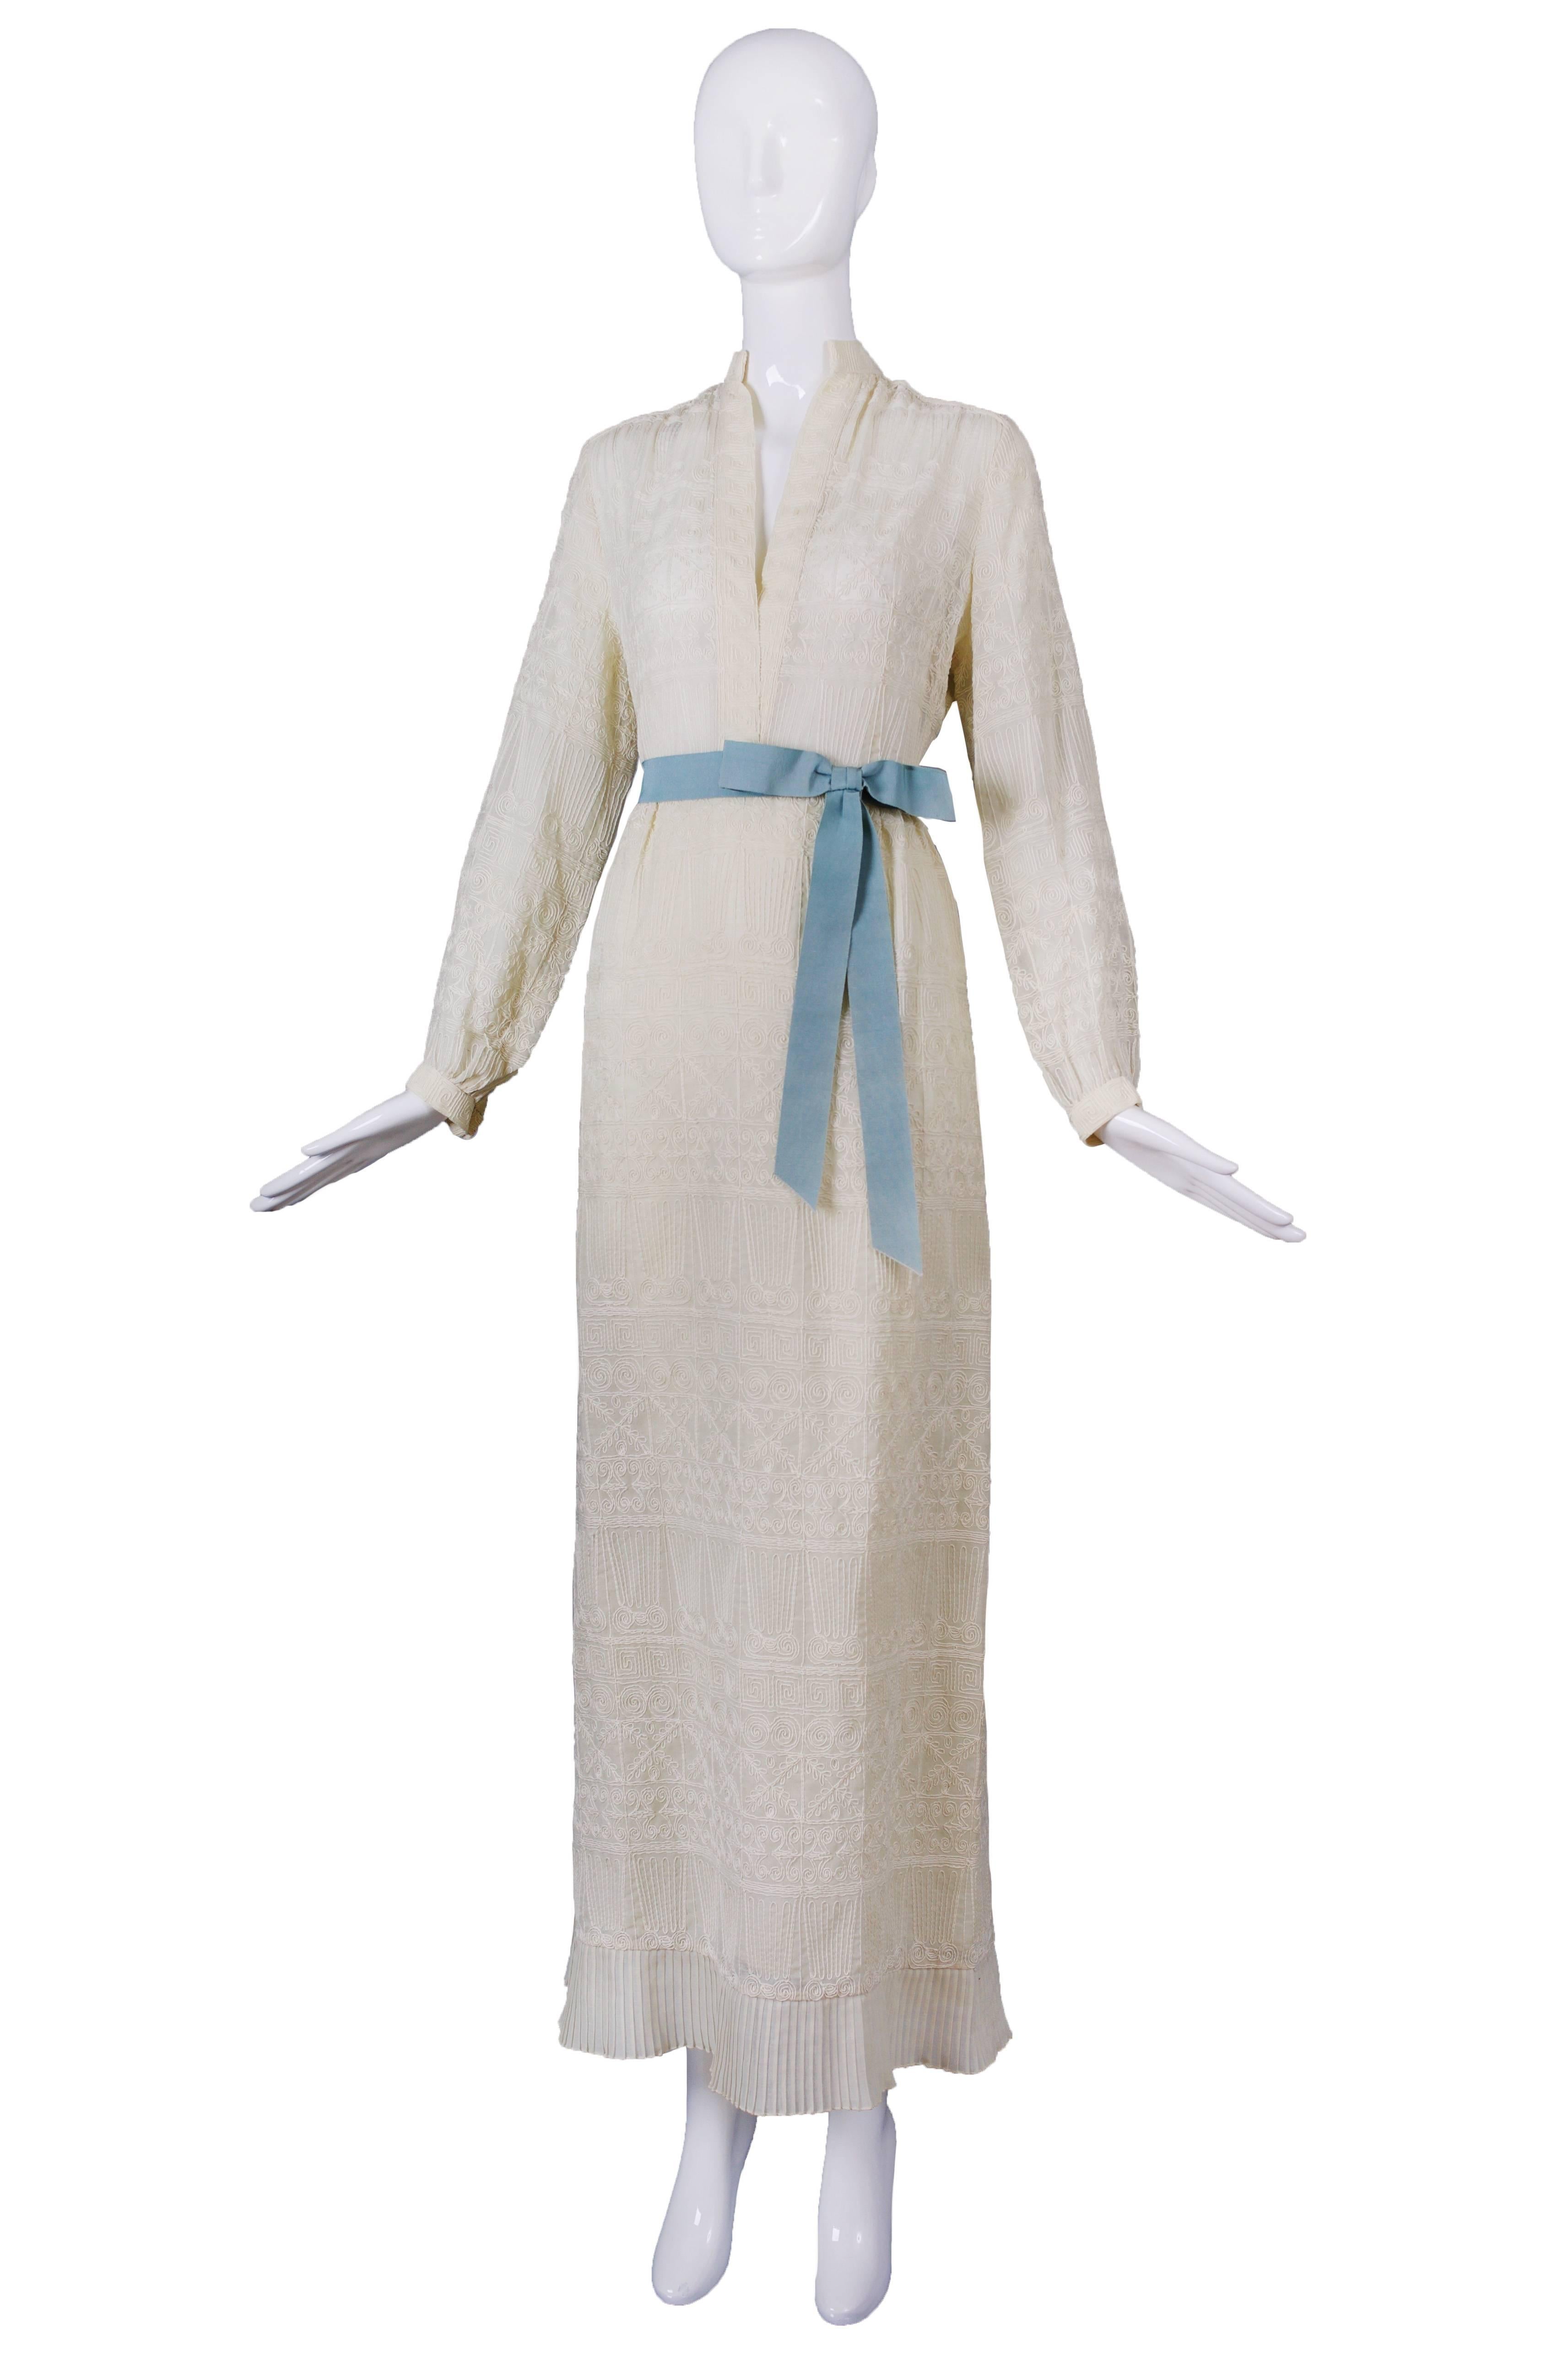 A 1970s Pat Sandler tea or wedding gown in a soft off white/creme-colored hue and embroidered from head to toe, giving the illusion of lace. There is no size or fabric tag but I'm guessing the fabric is either cotton or a cotton blend. Please